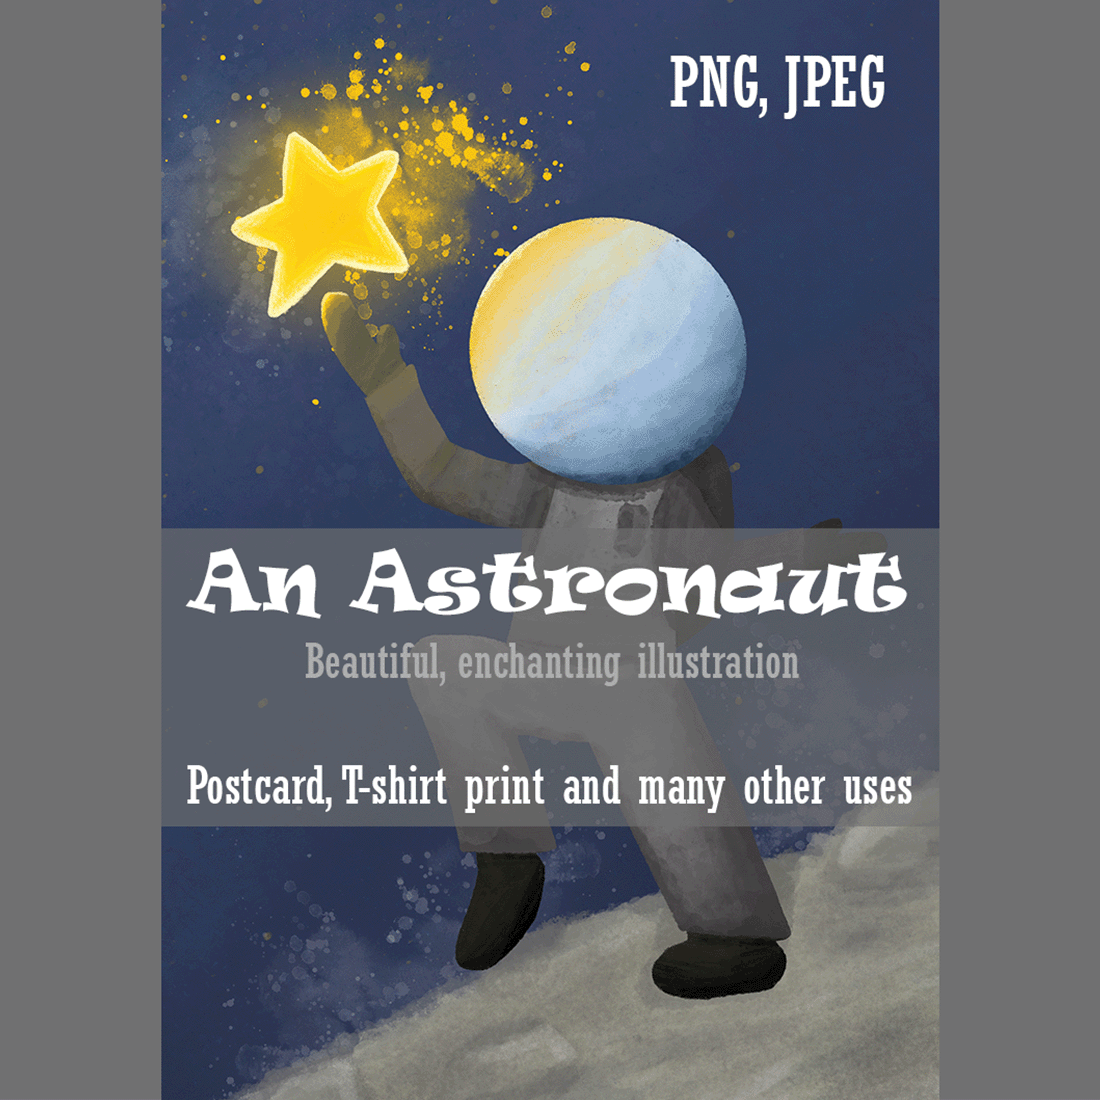 An Astronaut on the Moon - for different purposes cover image.